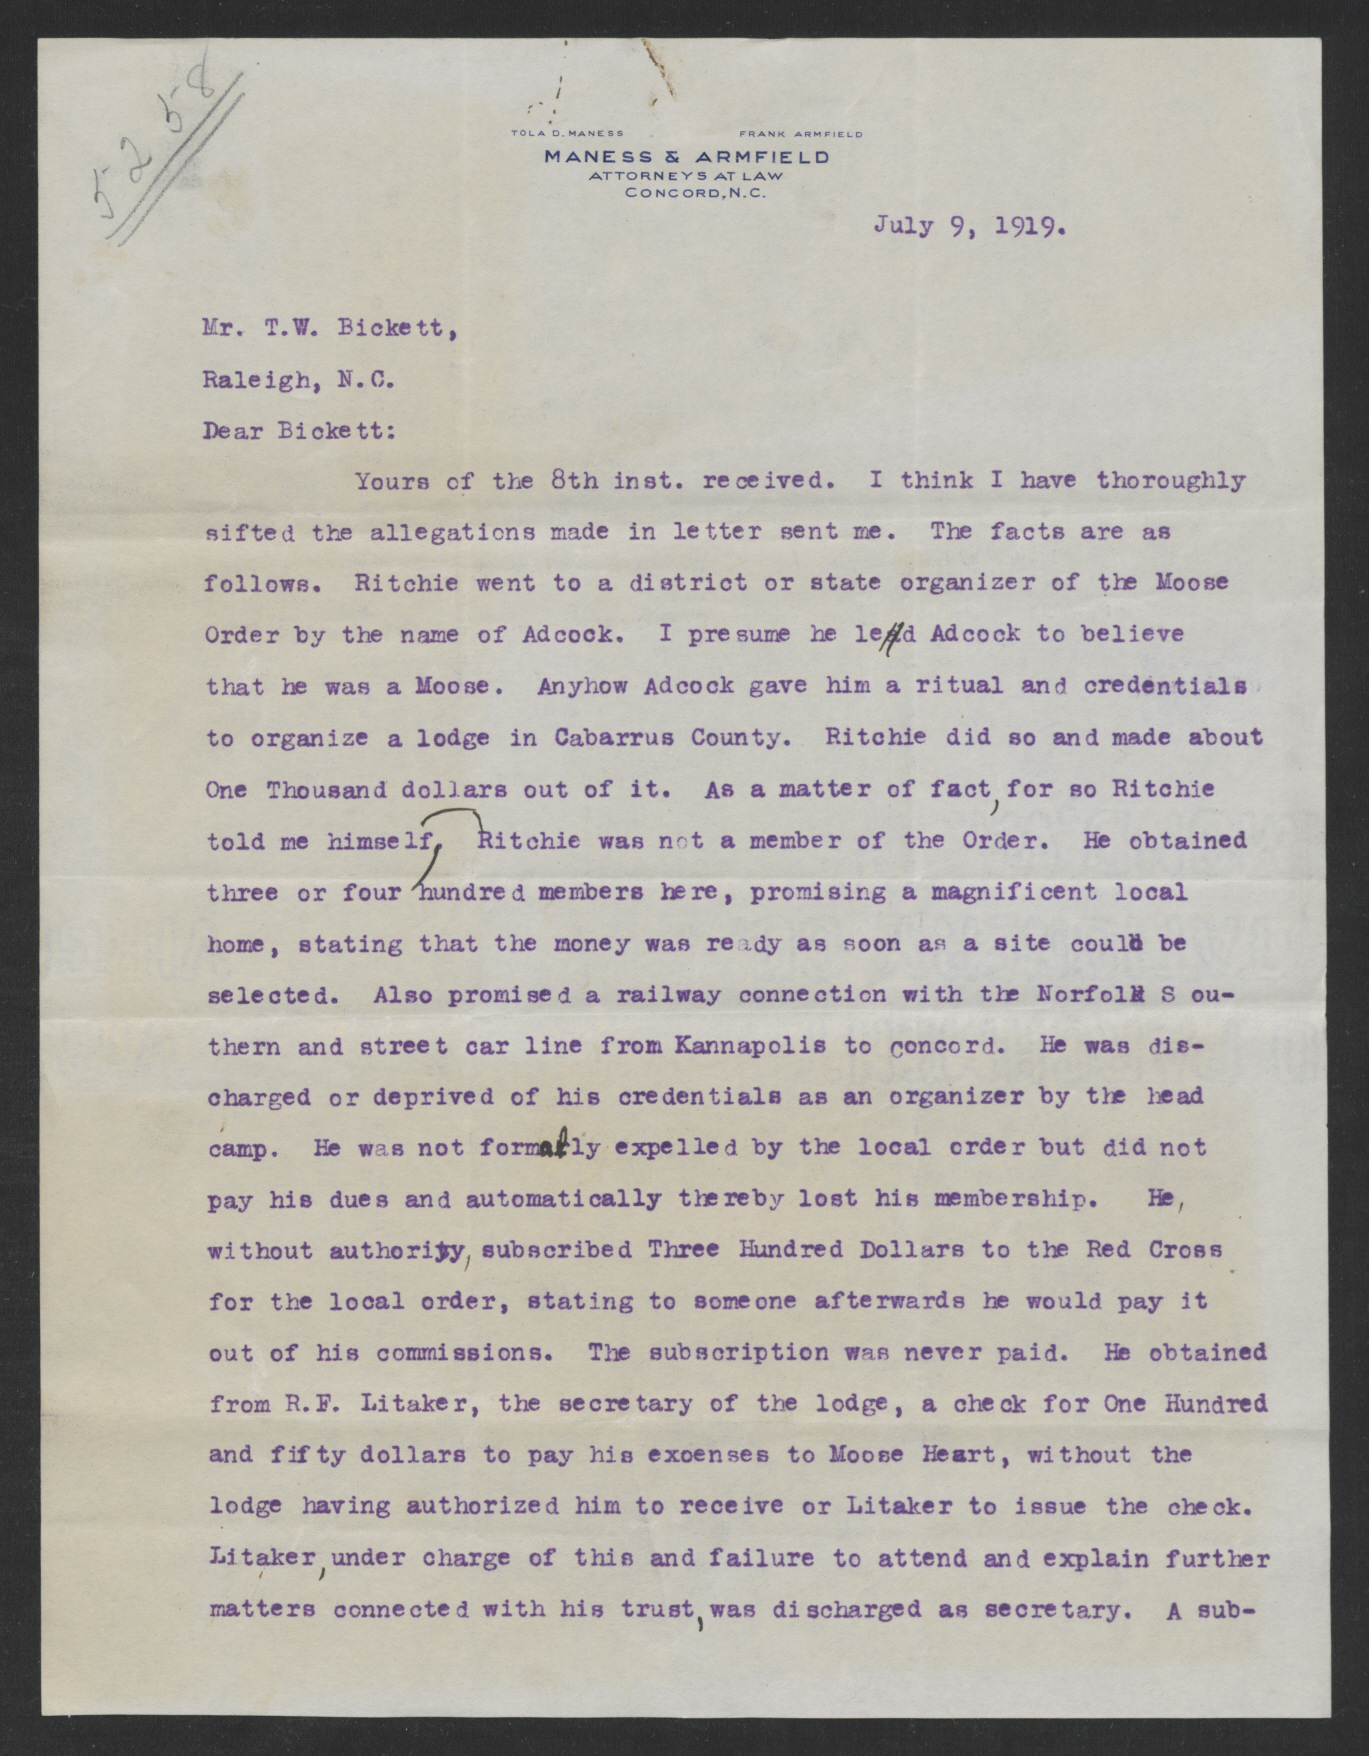 Letter from Frank Armfield, Sr., to Thomas W. Bickett, July 9, 1919, page 1